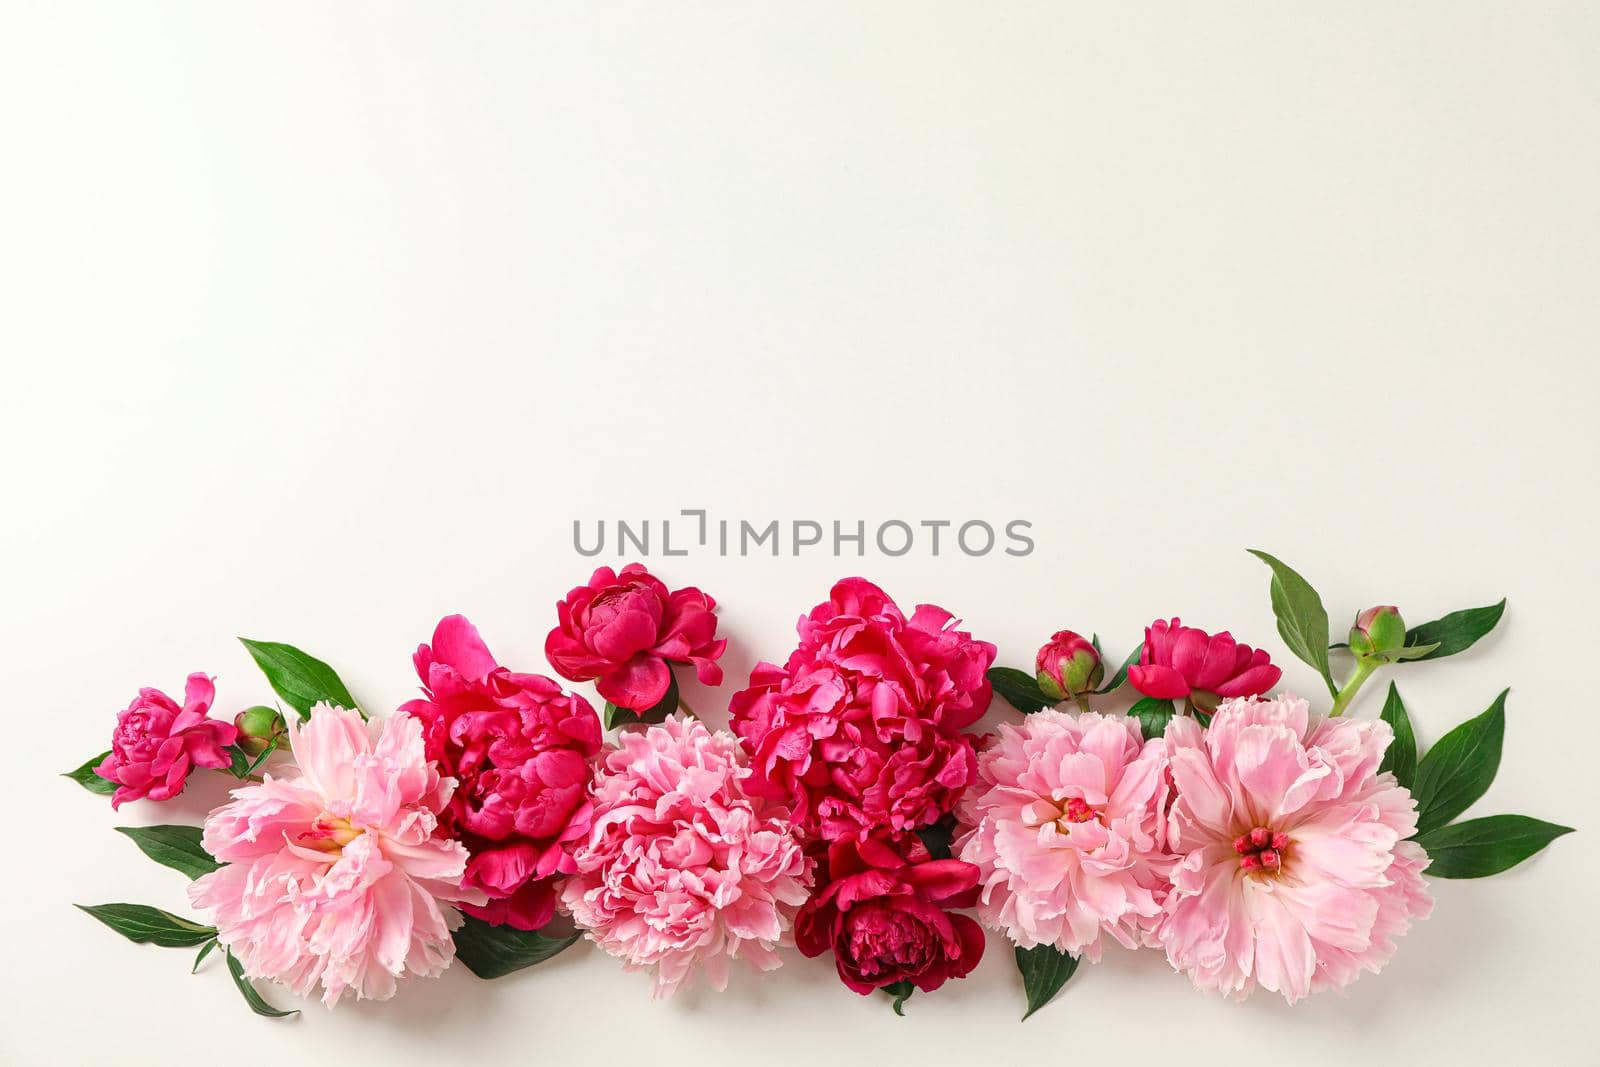 Flat lay composition with beautiful peonies on white background, space for text and top view